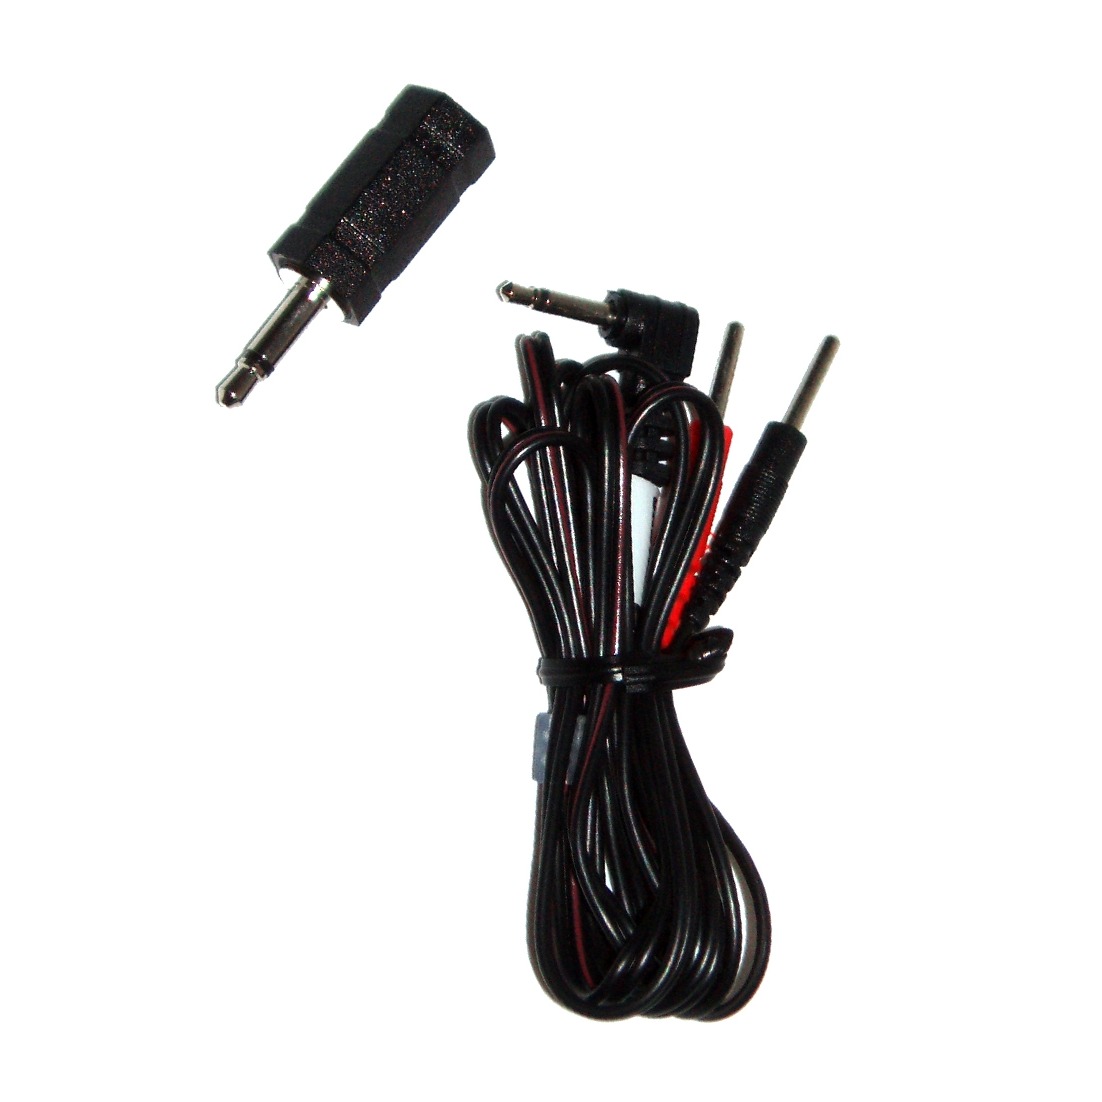 3.5mm/2.5mm Jack Adaptor Cable Kit